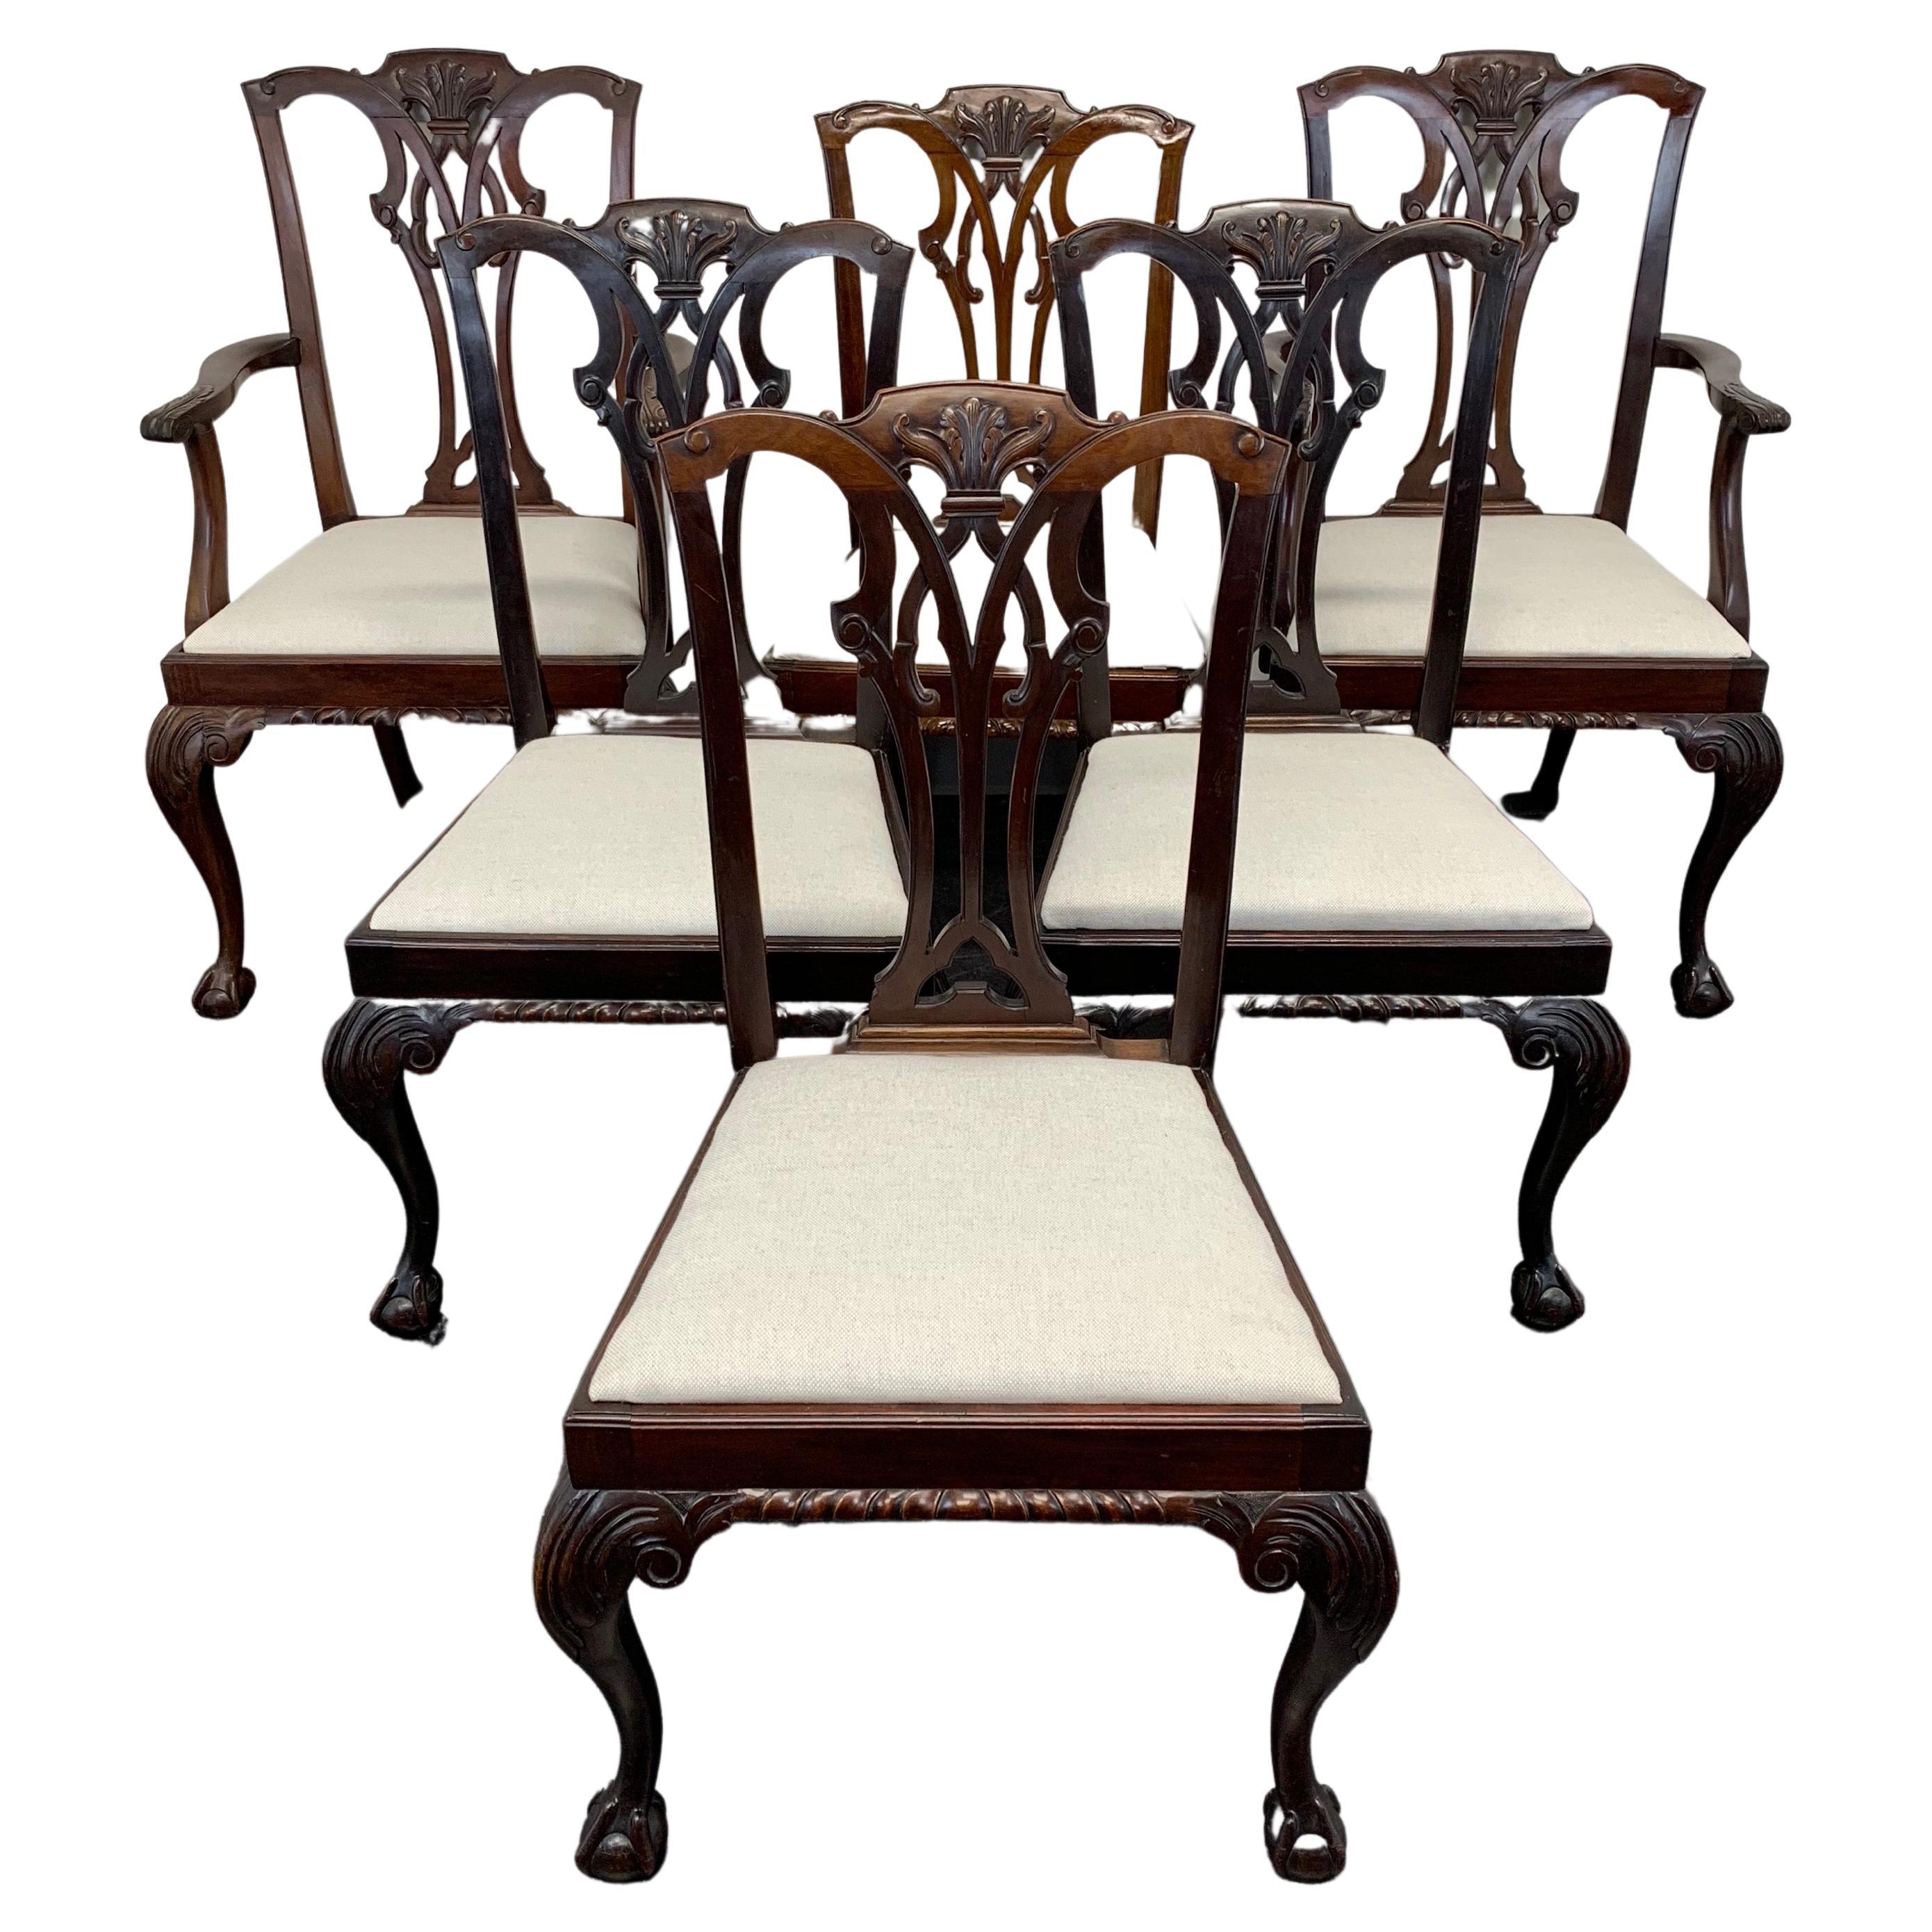 Antique Mahogany Chippendale Ball Claw Dining Chairs by Pratt Bros - Set of 6